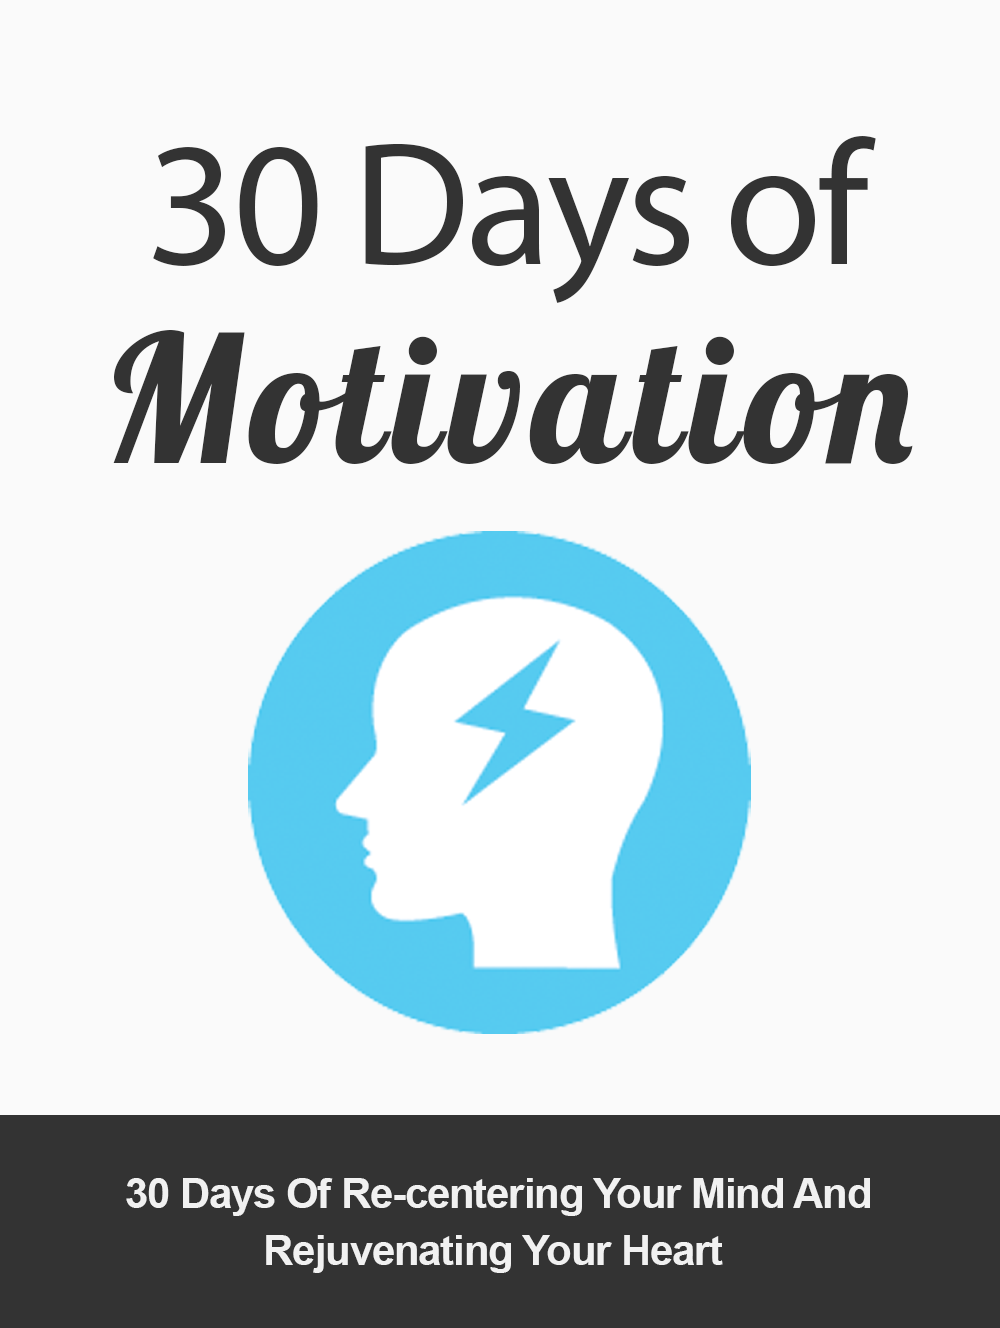 30-Days of Motivation FREE Course